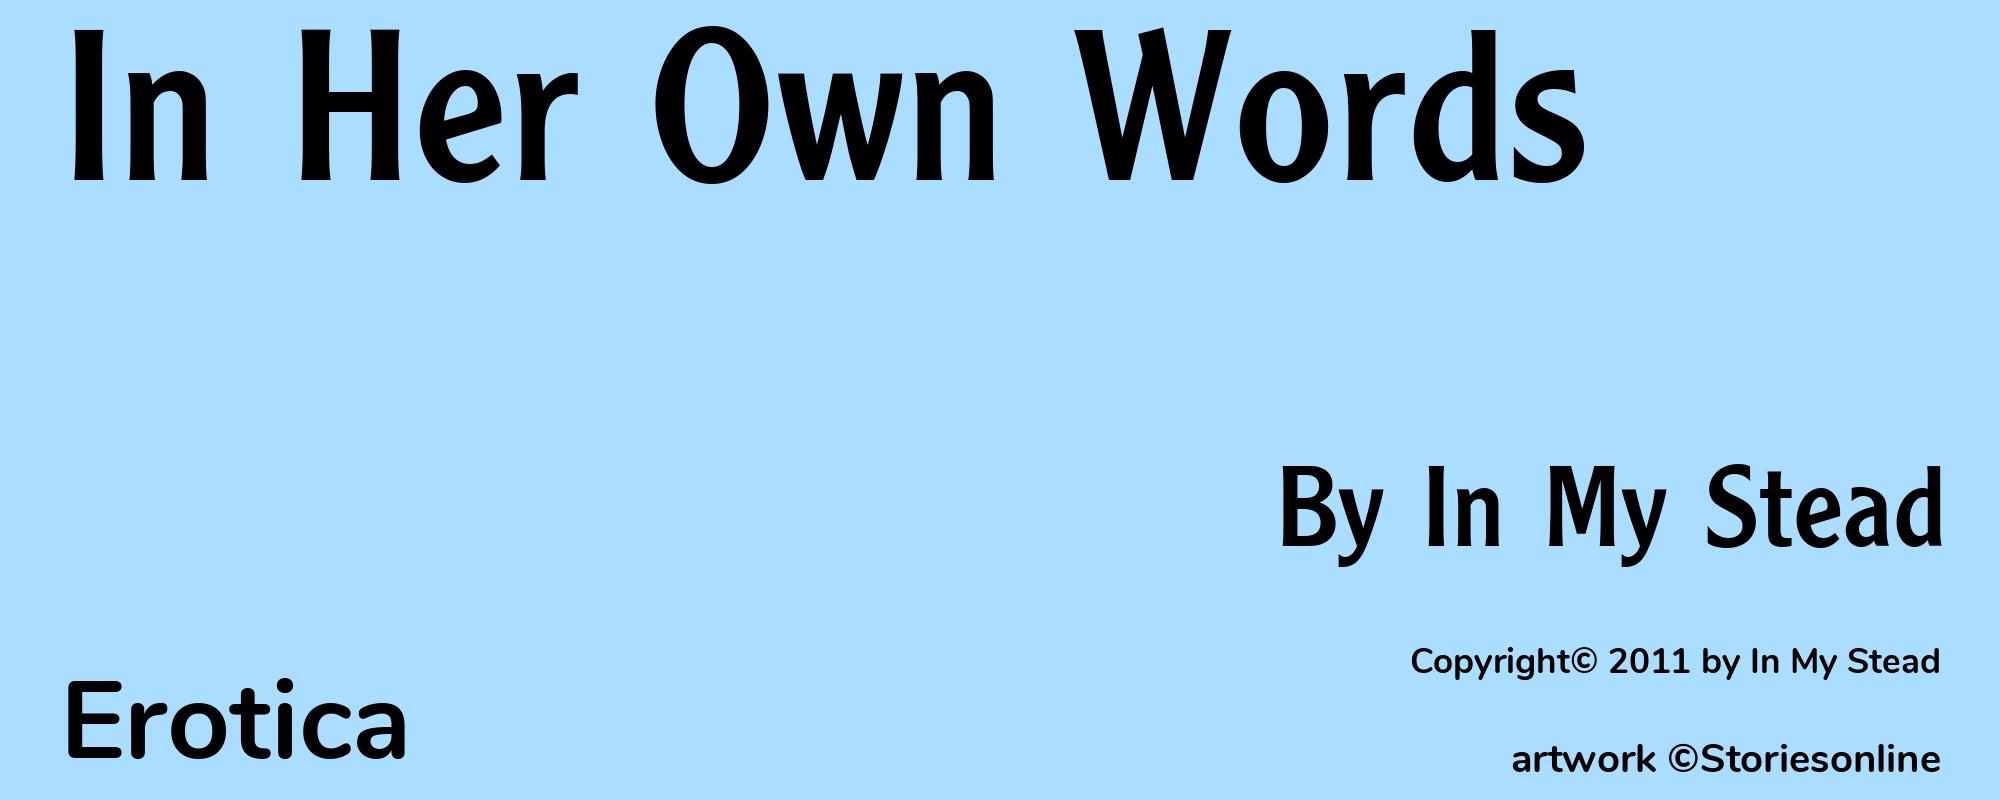 In Her Own Words - Cover